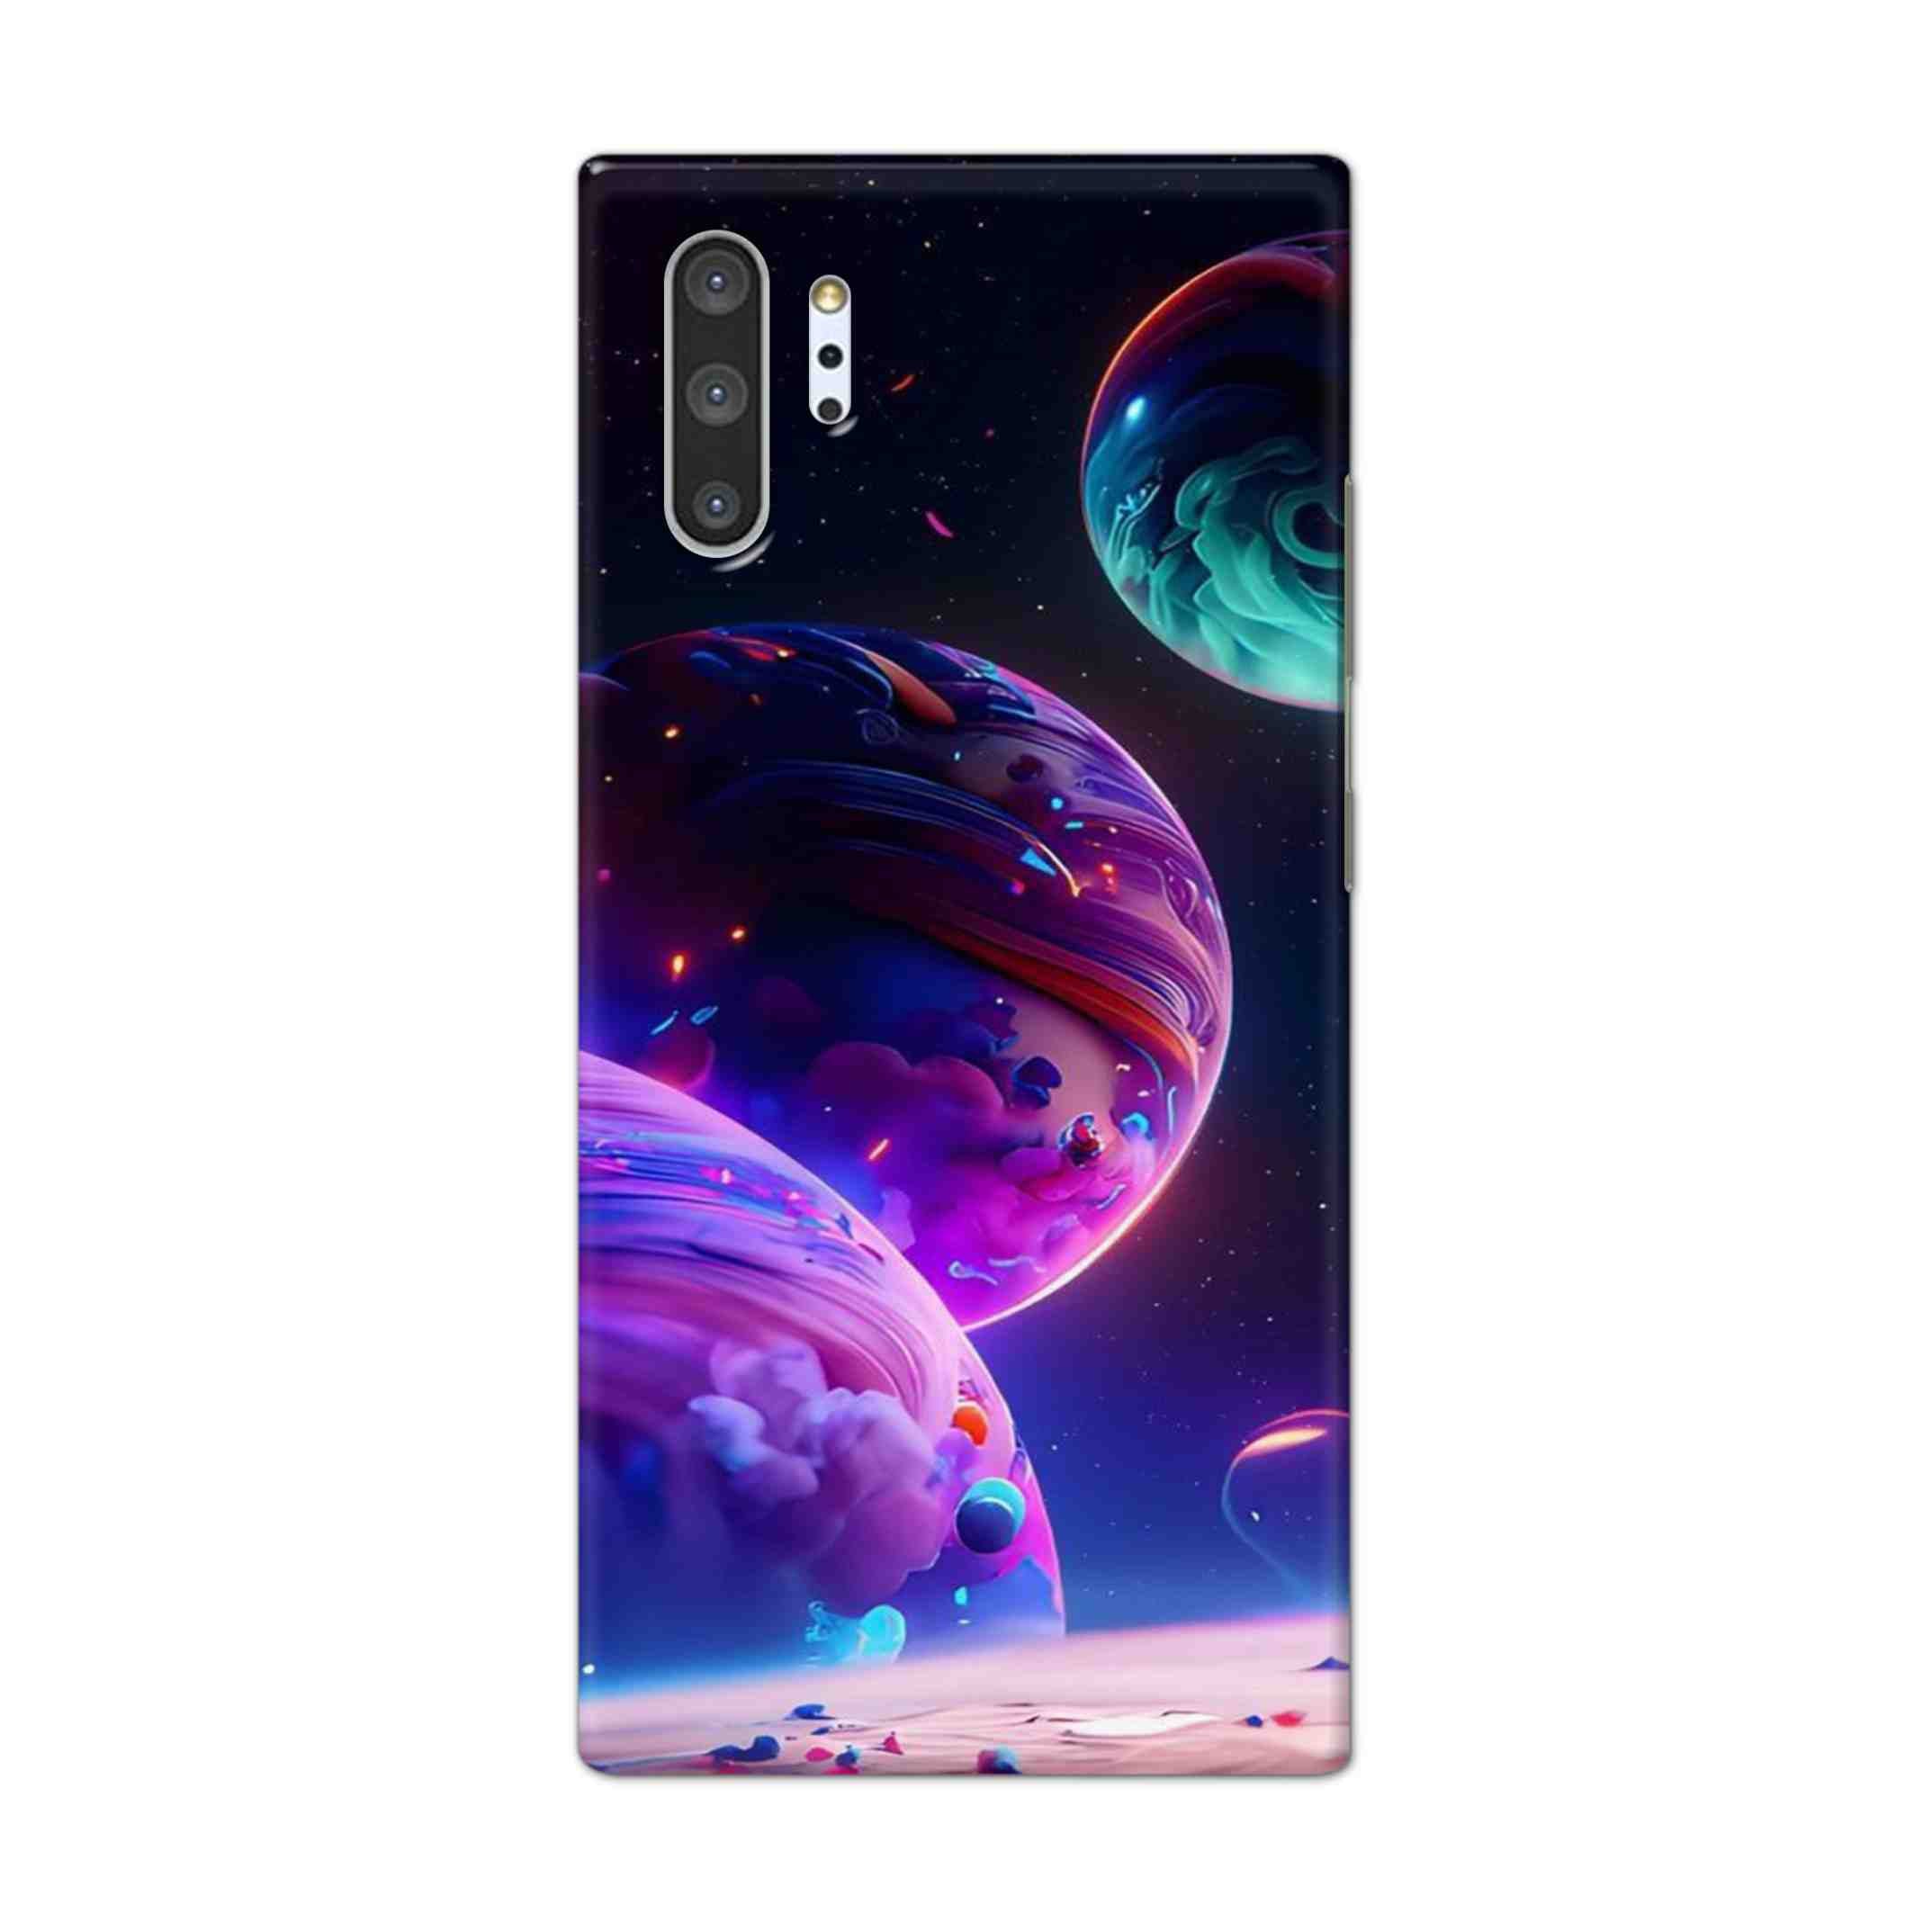 Buy 3 Earth Hard Back Mobile Phone Case Cover For Samsung Galaxy Note 10 Pro Online